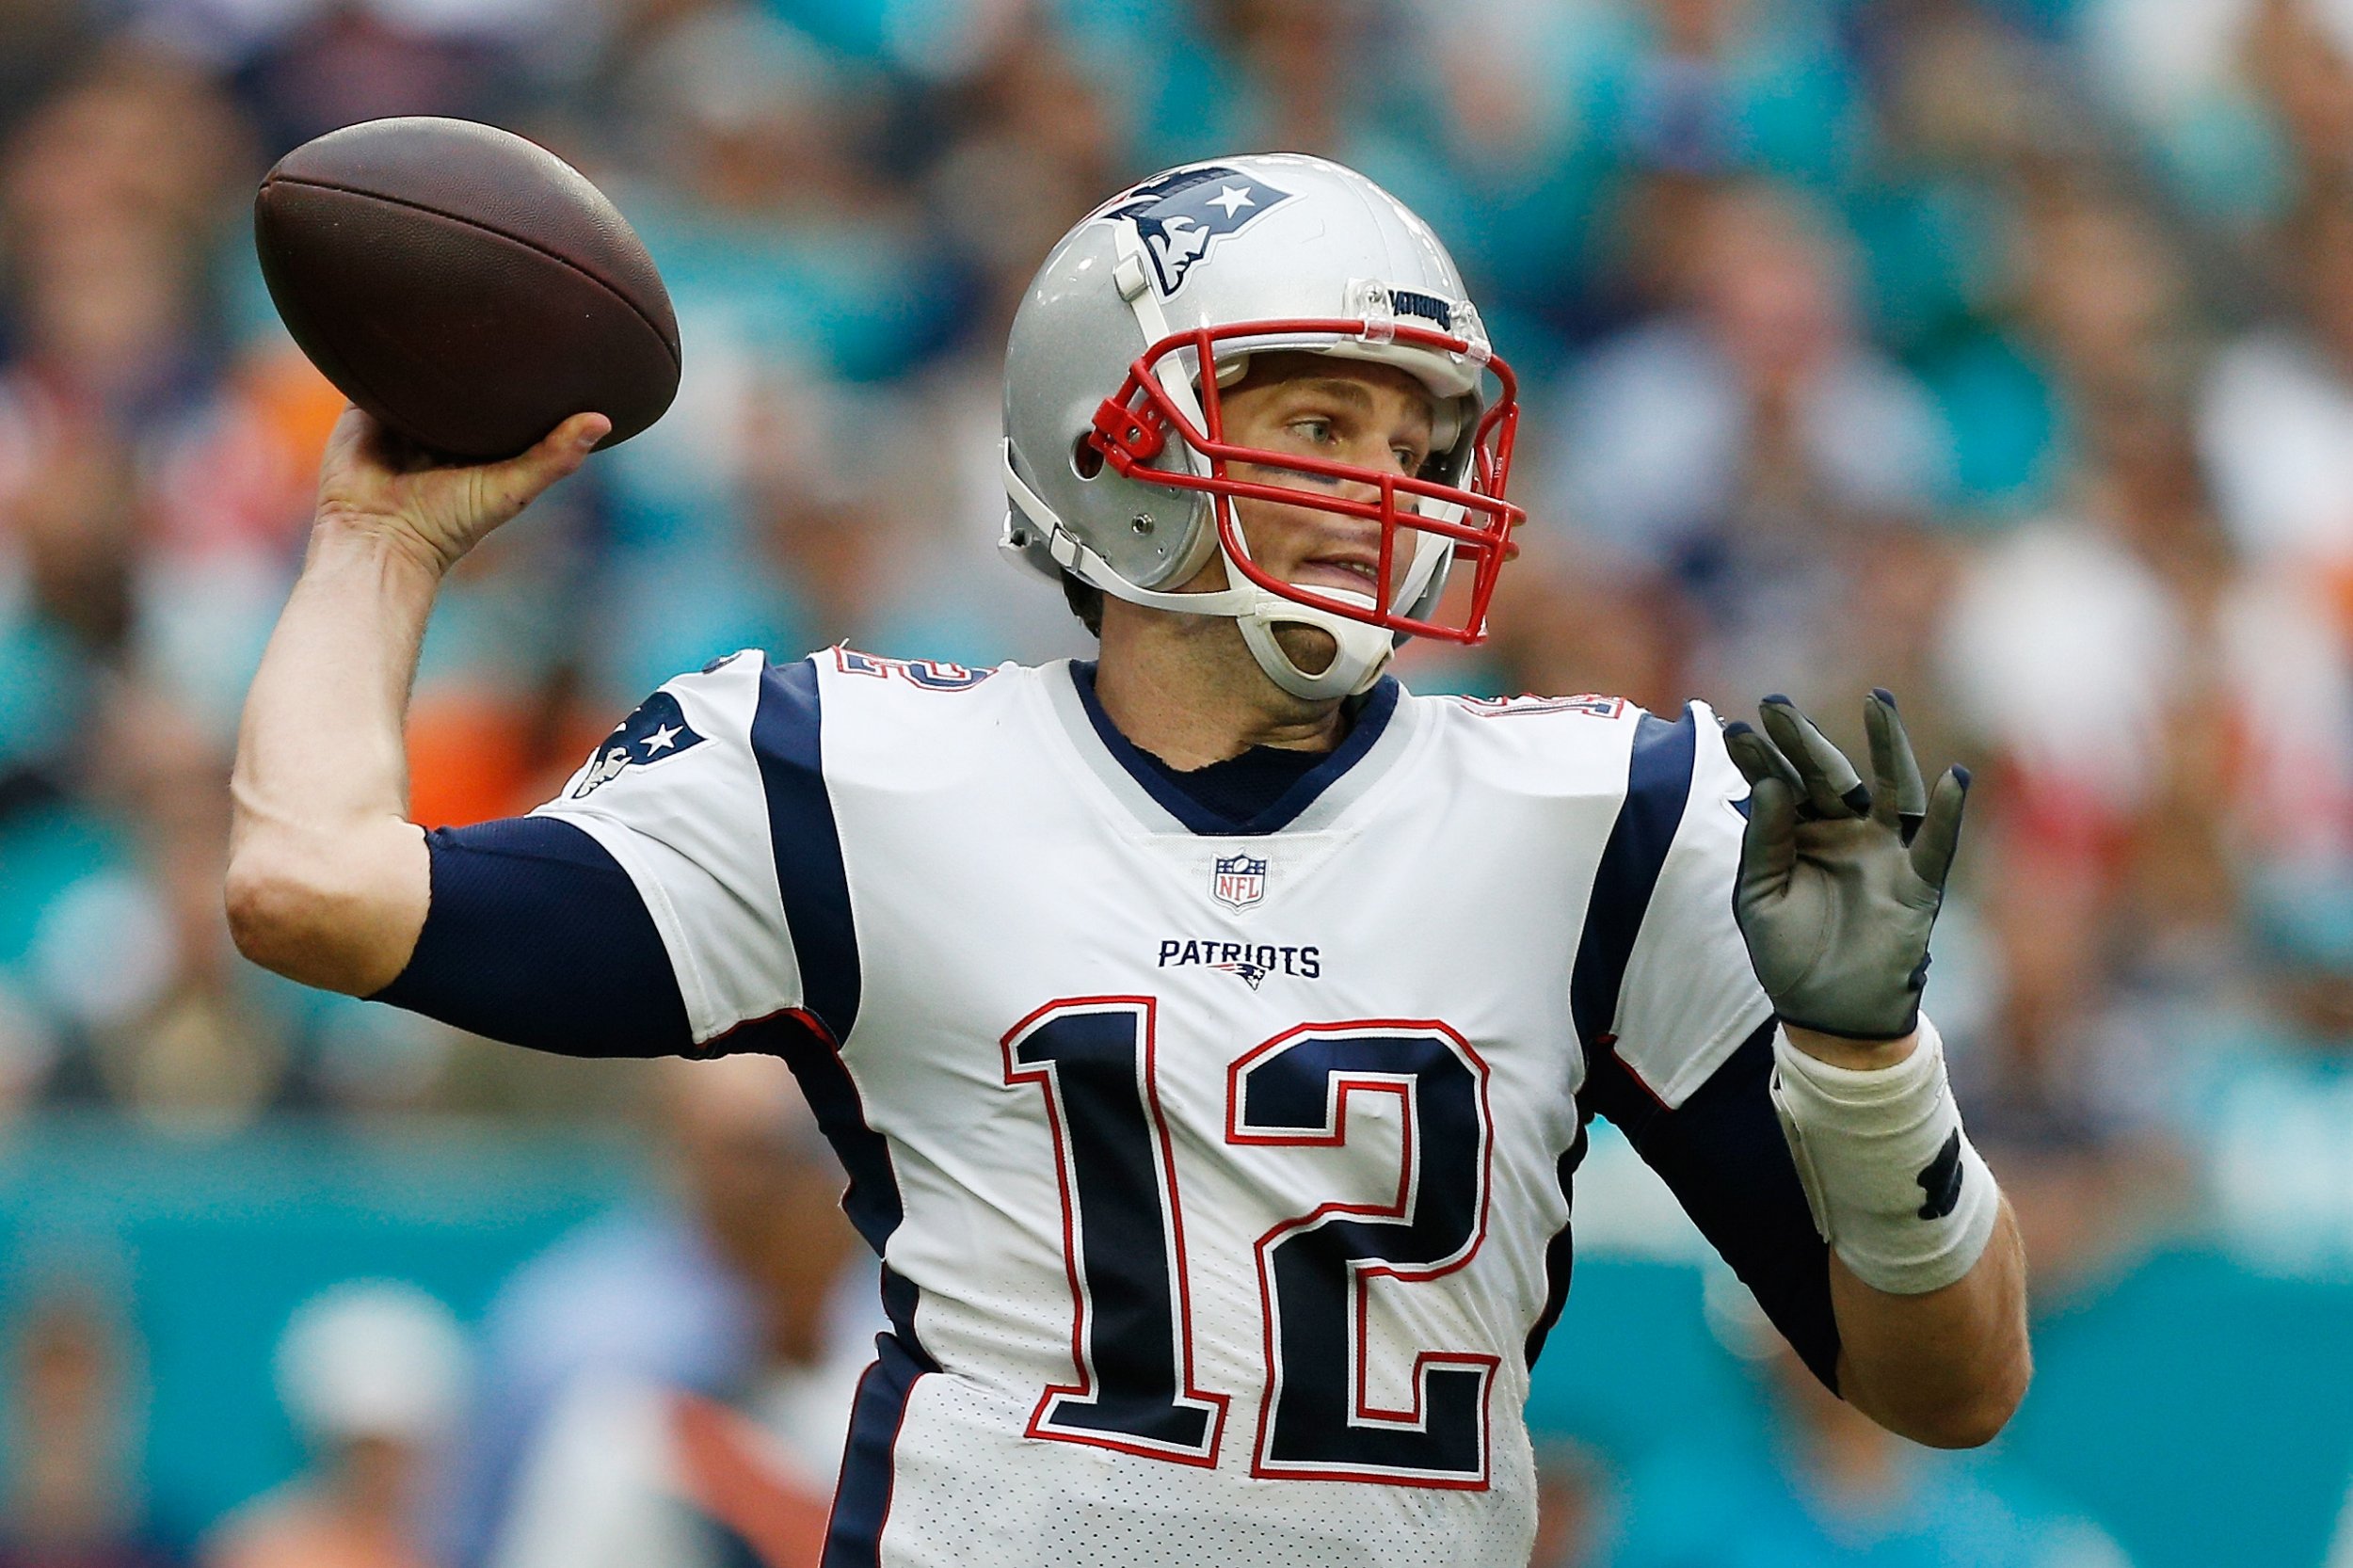 Pro Bowl Voting Results: Tom Brady Earns Record 14th Selection